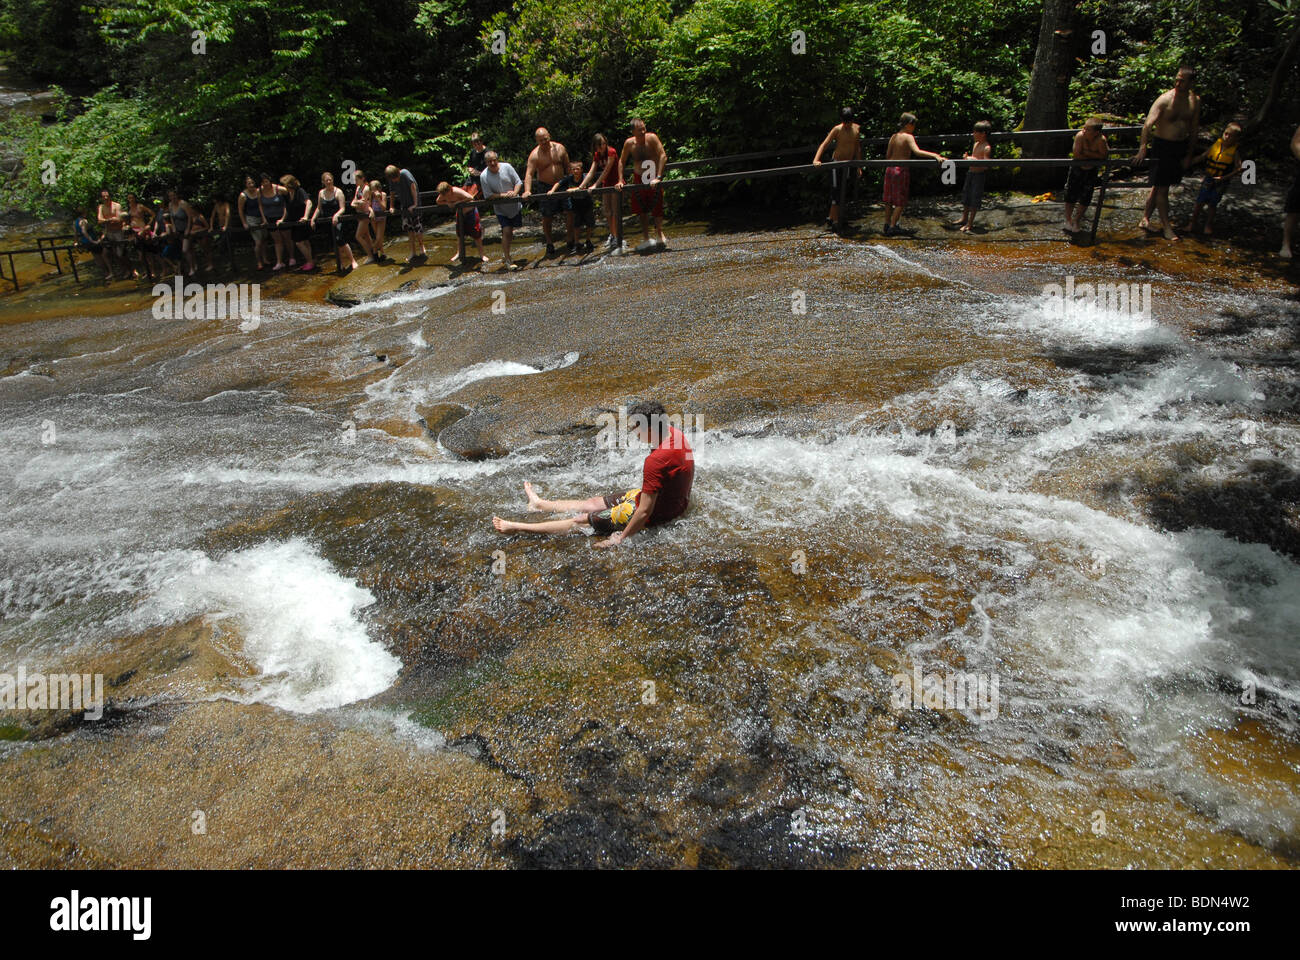 A young boy slides down a flat rock water slide in North Carolina. Stock Photo